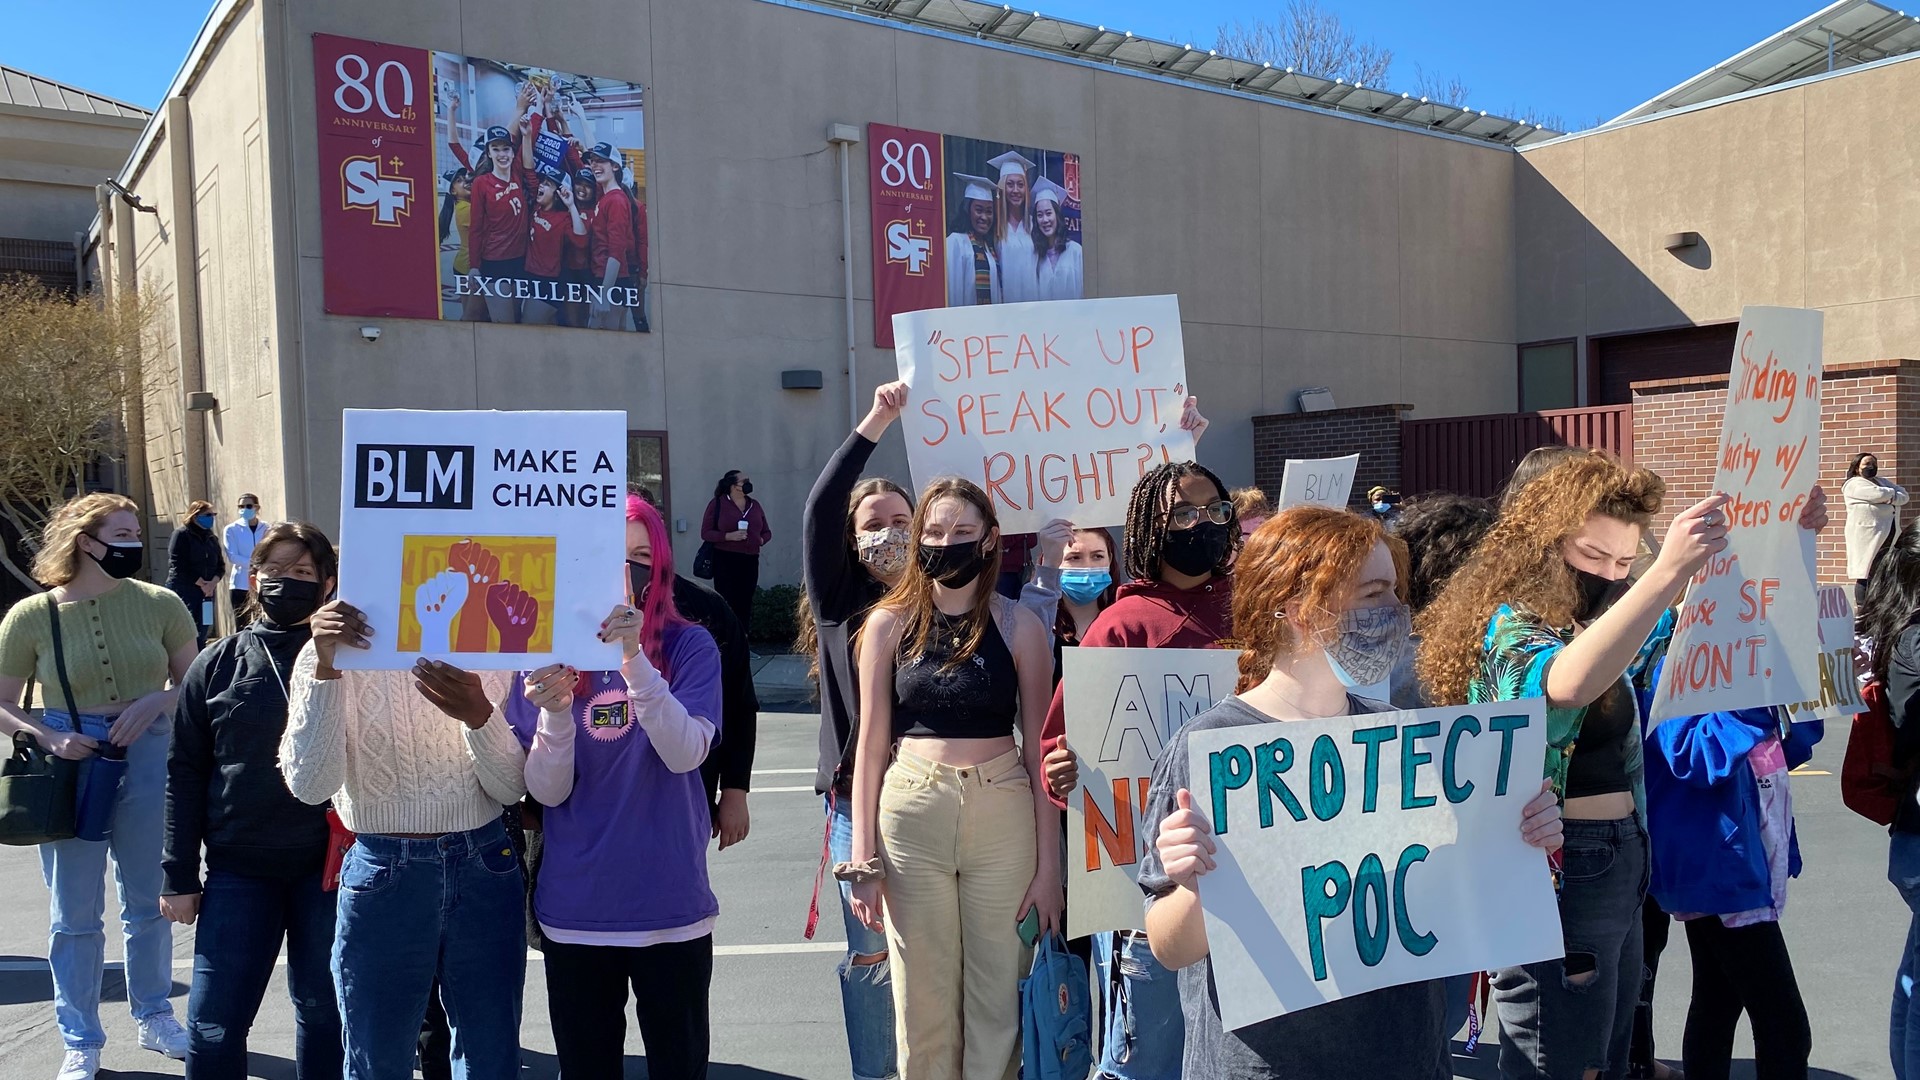 Students, parents and alumni of St. Francis all say that the school needs to improve and are demanding more representation in school leadership.